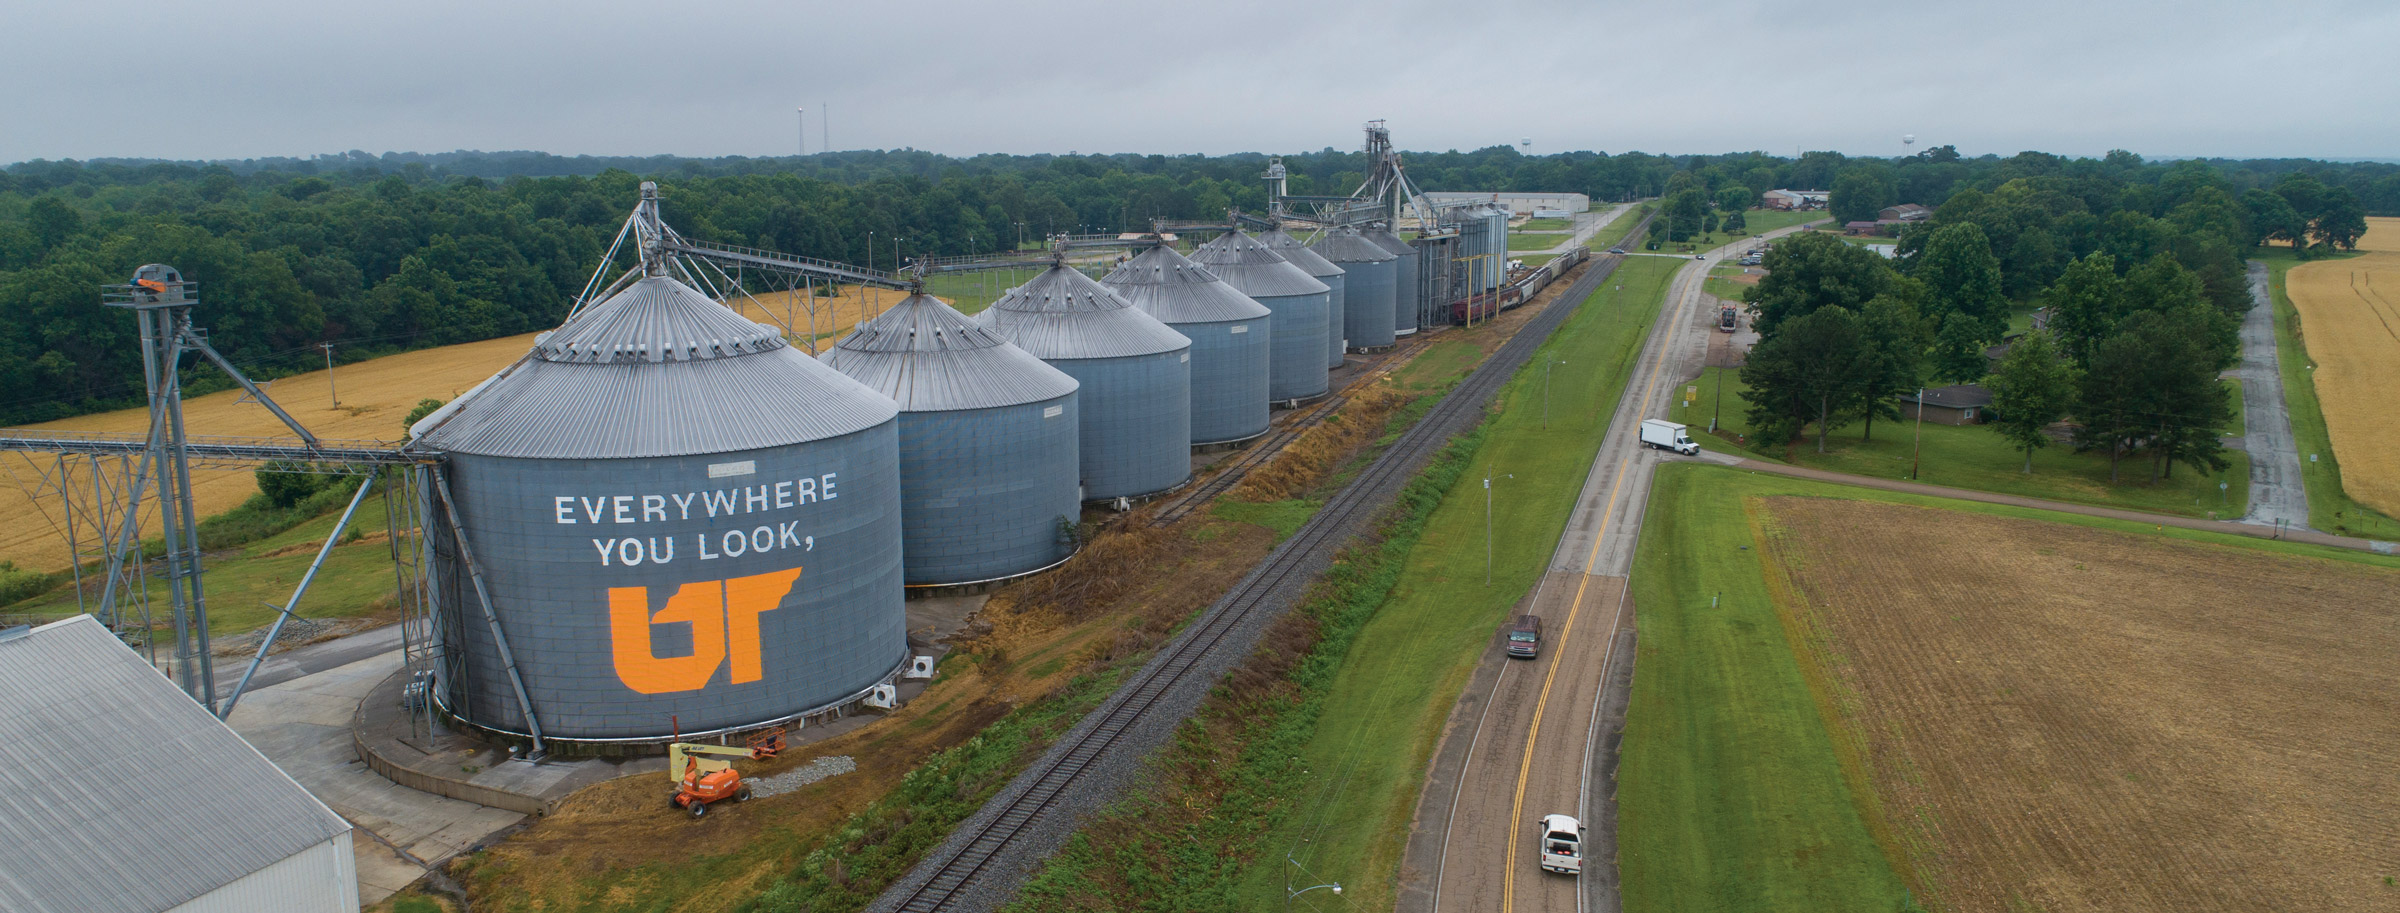 A row of grain silos in Sharon, TN. The largest and frontmost silo is painted with "Everywhere You Look, UT"